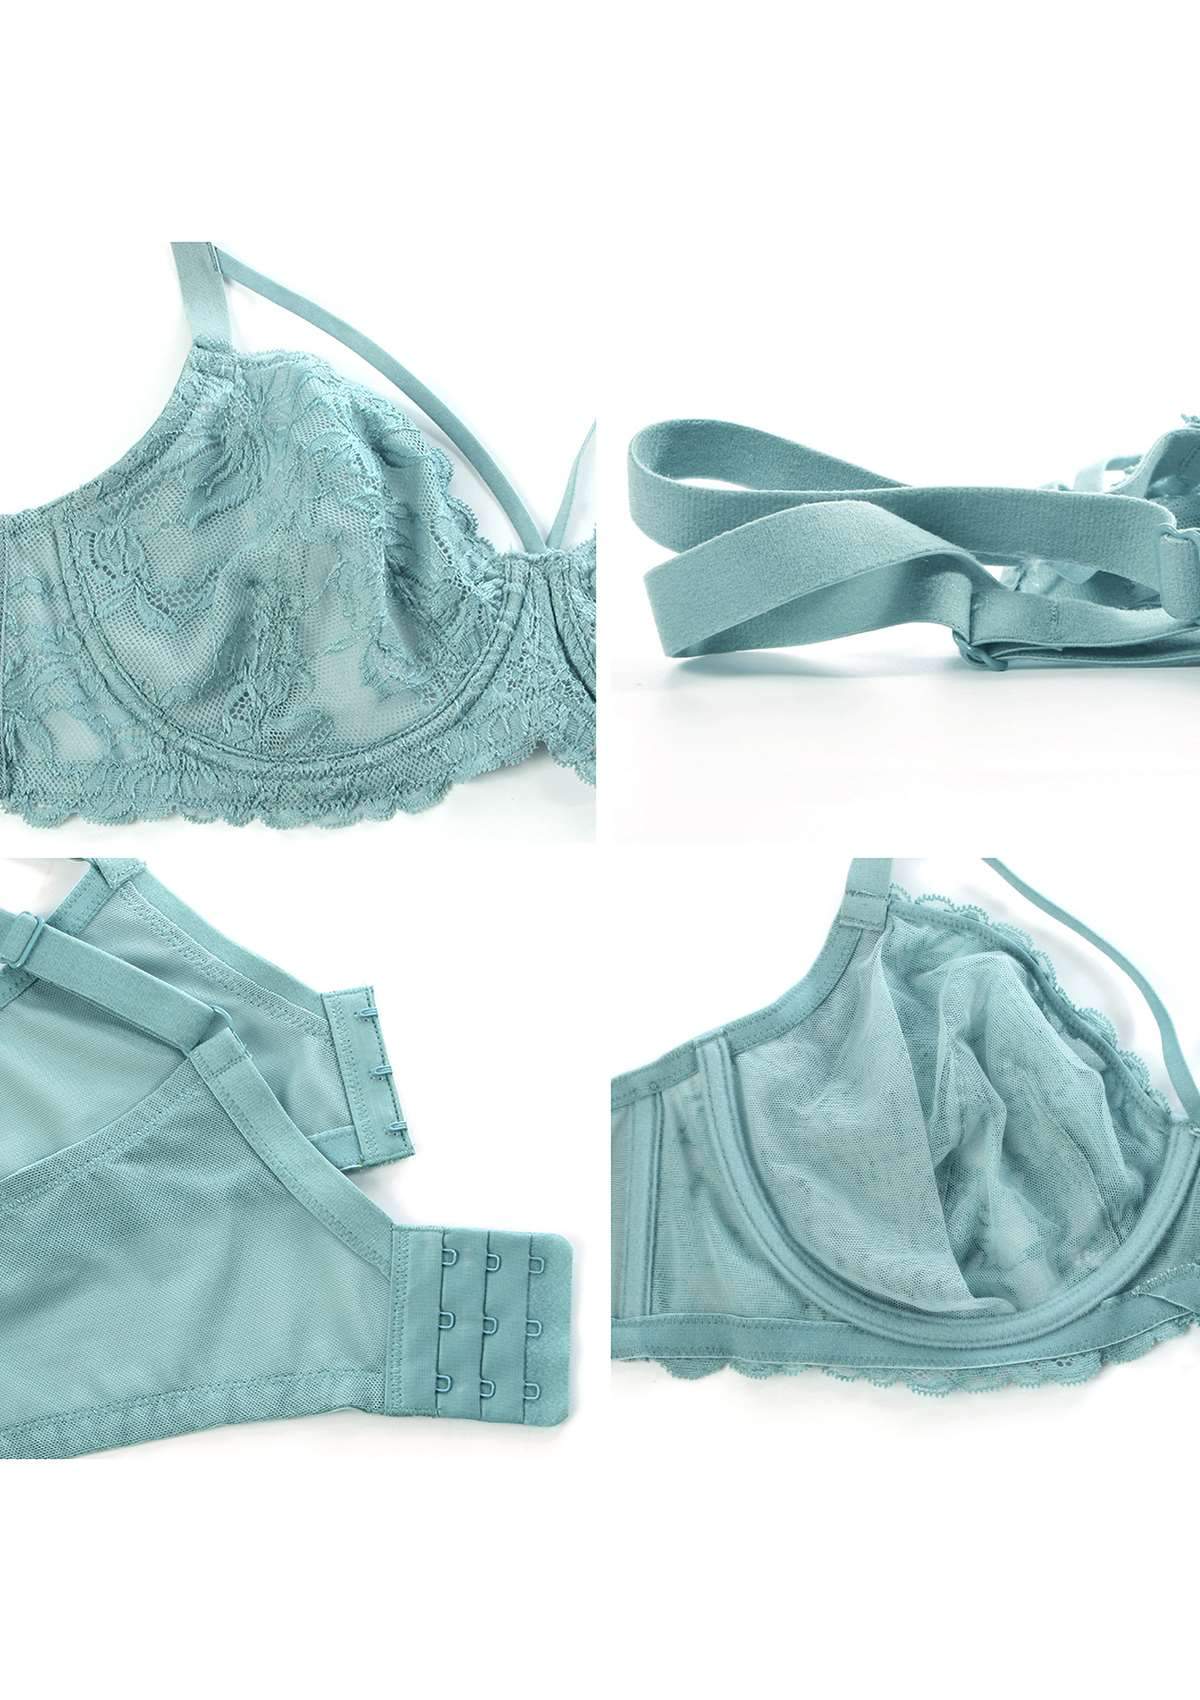 HSIA Pretty In Petals Unlined Lace Bra: Comfortable And Supportive Bra - Pewter Blue / 42 / DD/E